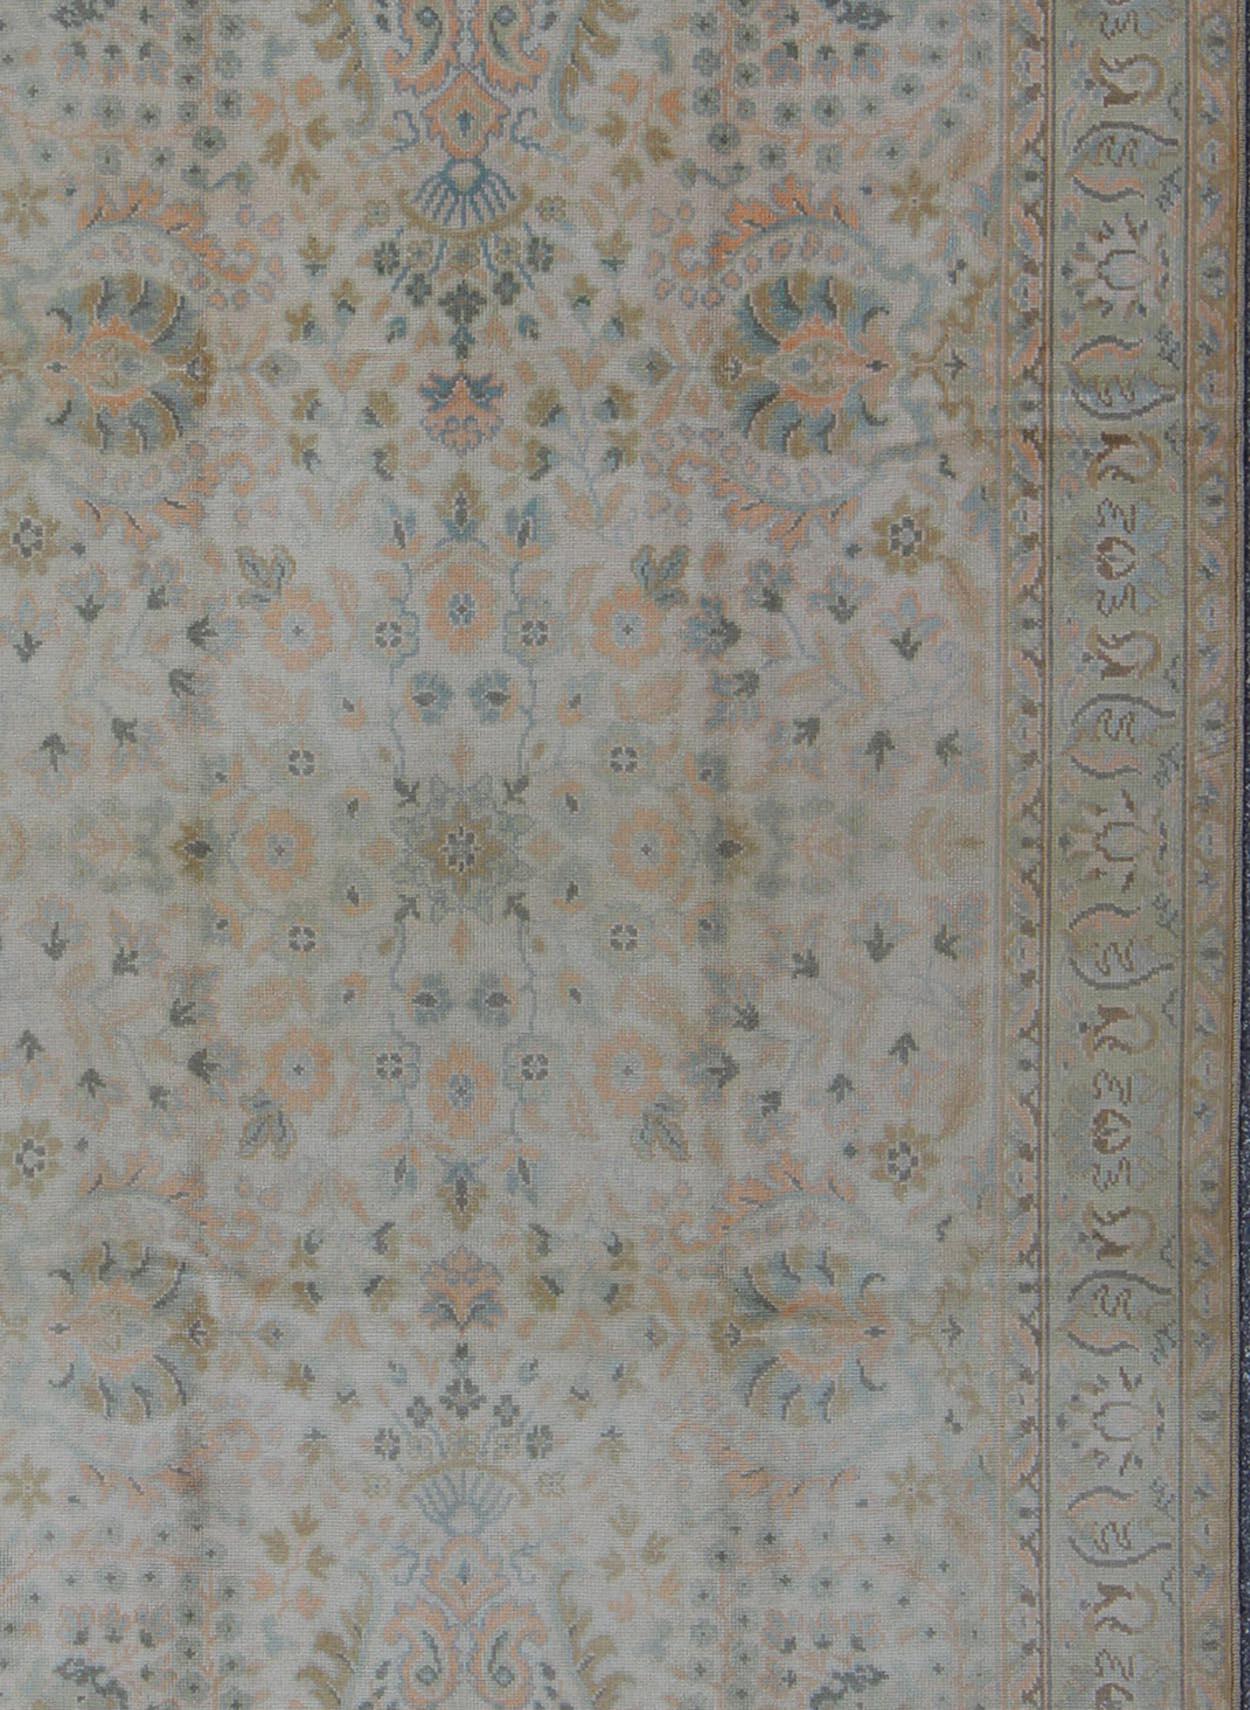 Measures: 6'0 x 9'10

Country of Origin: Turkey; Type: Oushak; Design: All-Over, Floral, Arabesque-Floral; Keivan Woven Arts: rug tu-vey-46011; Neutral Vintage Turkish Oushak Rug with Floral Design and Medallions in Wool; Persian Rug, Vintage